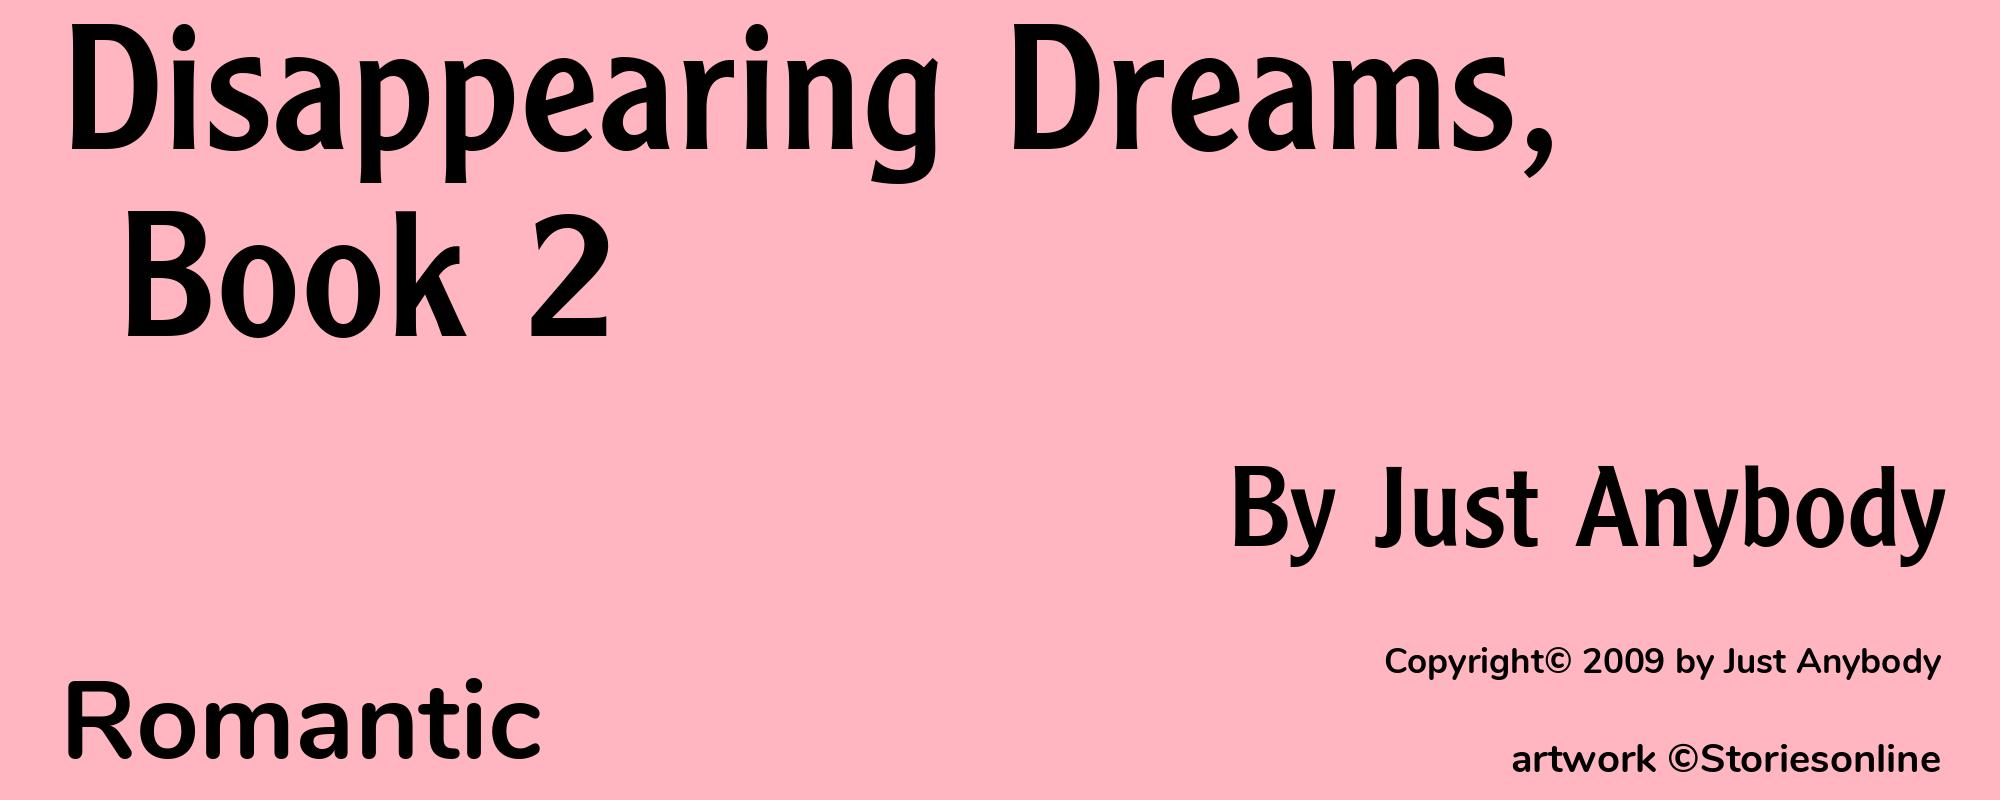 Disappearing Dreams, Book 2 - Cover